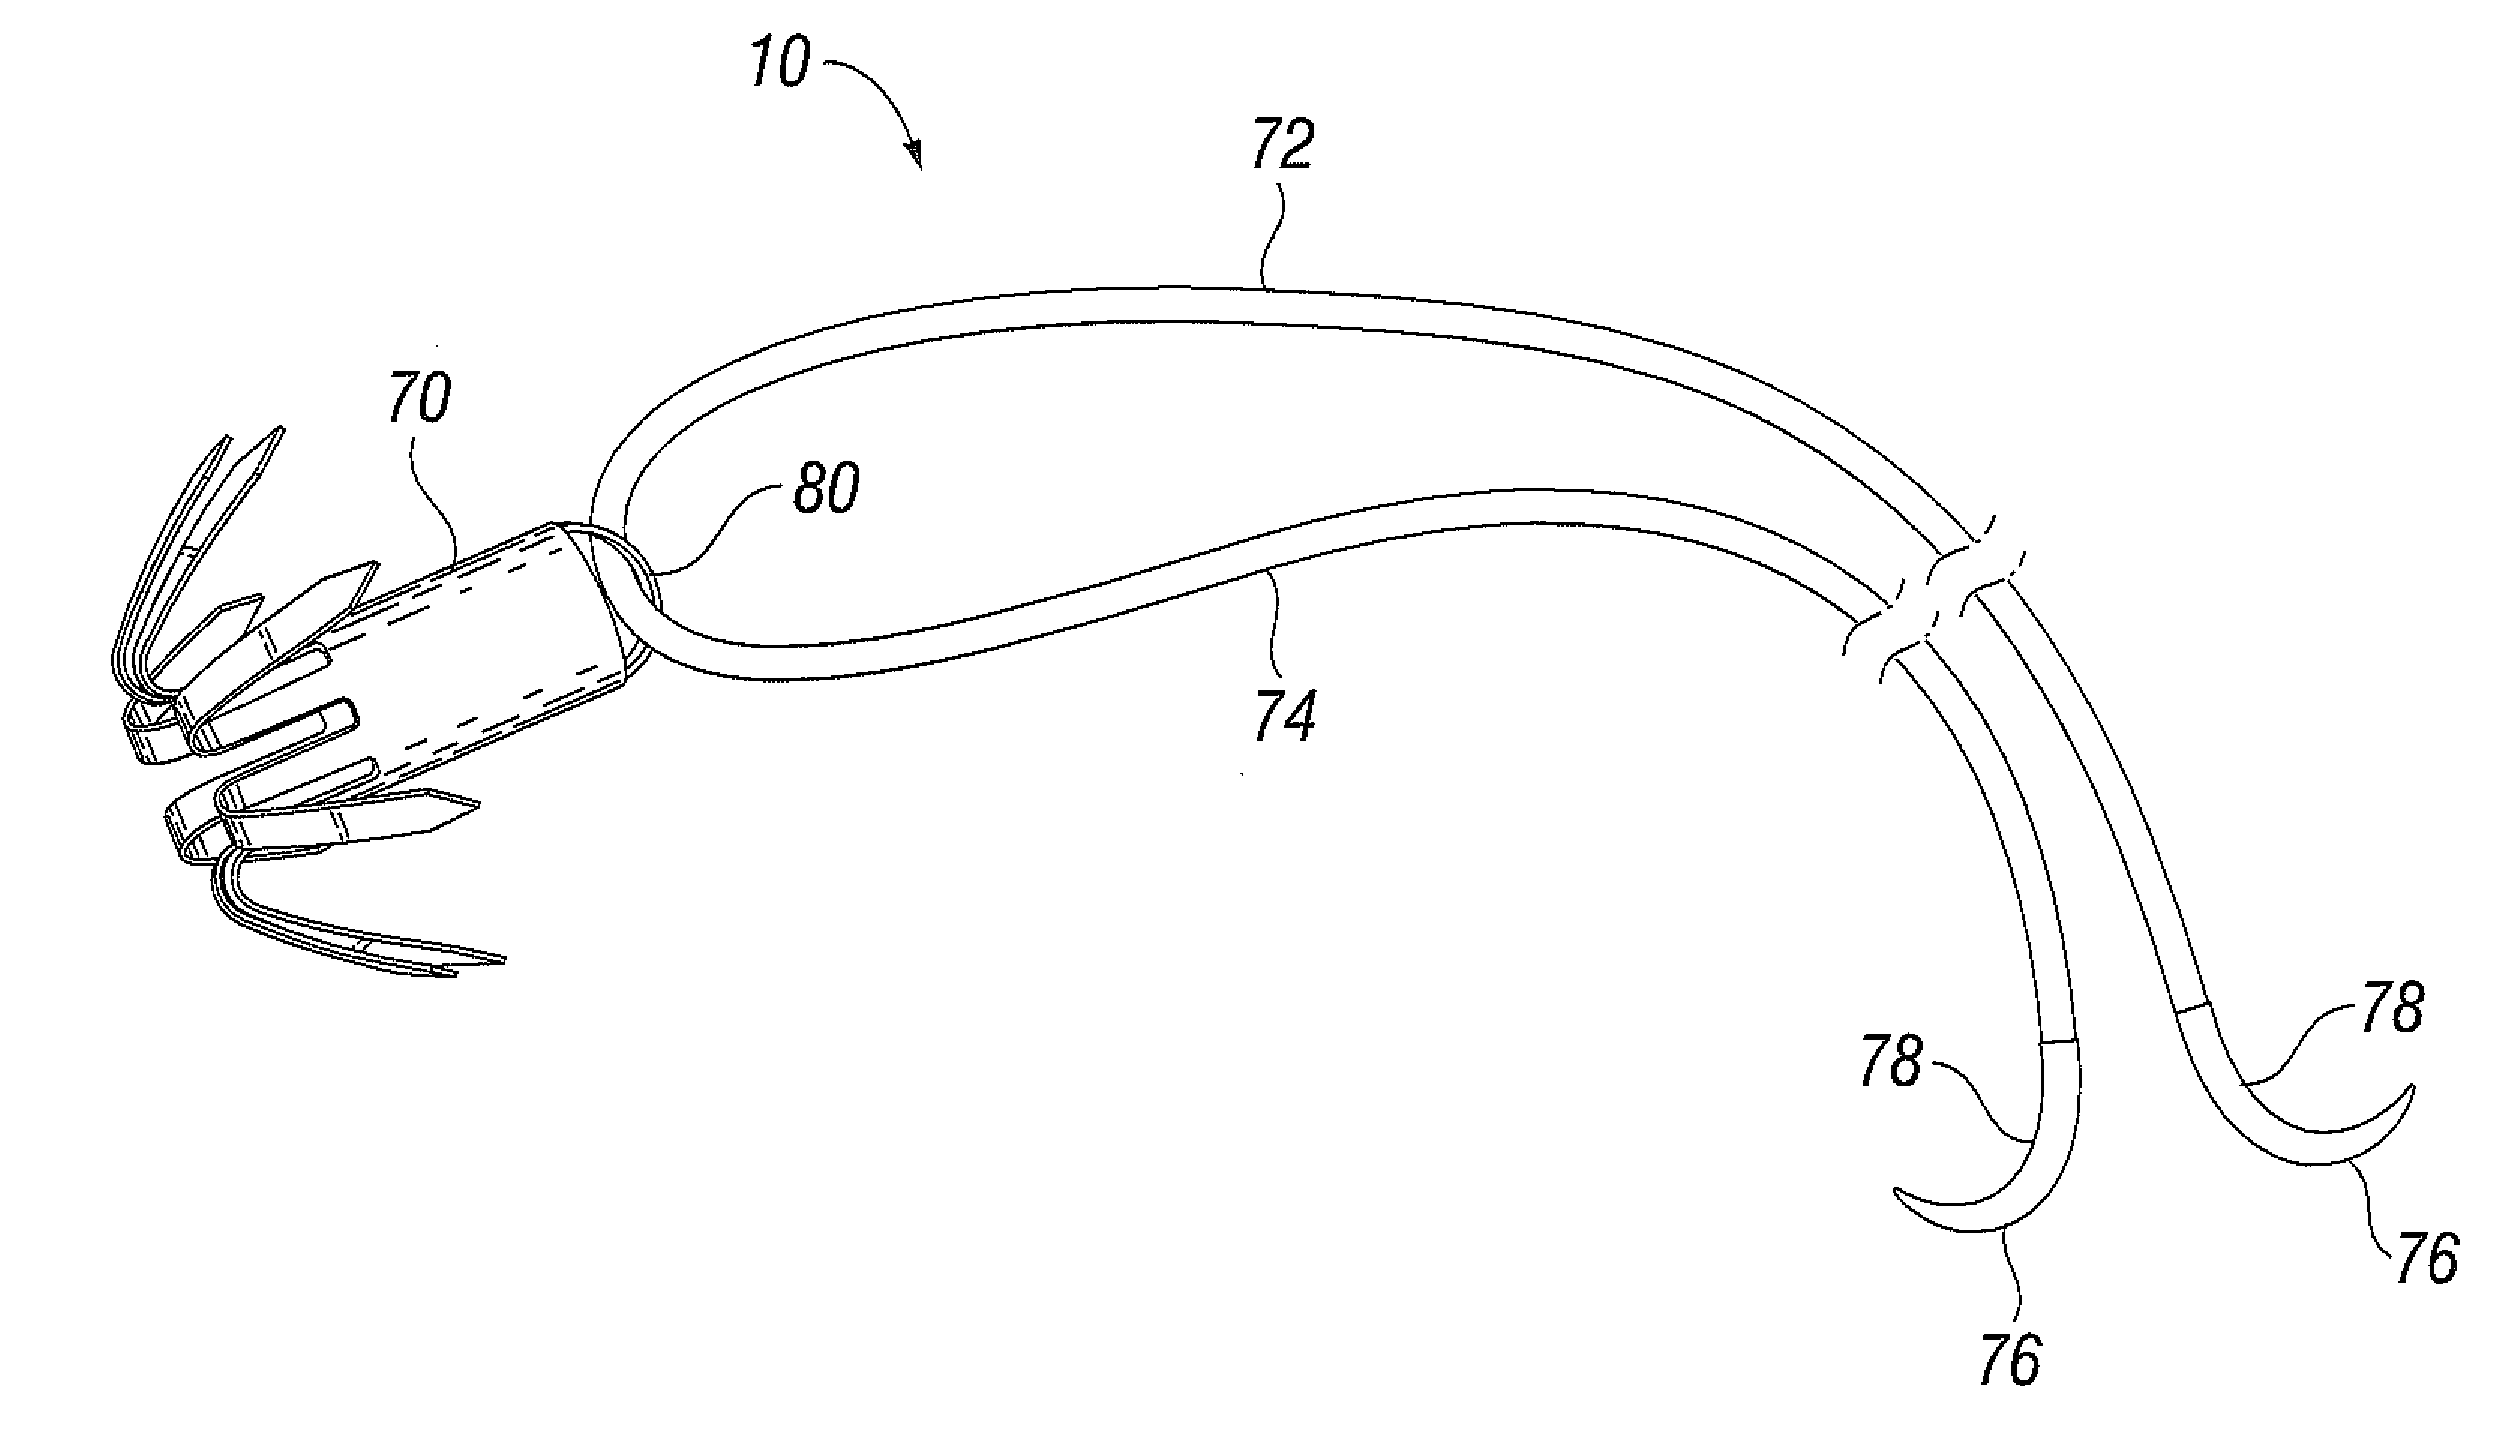 Suture and method for repairing a heart